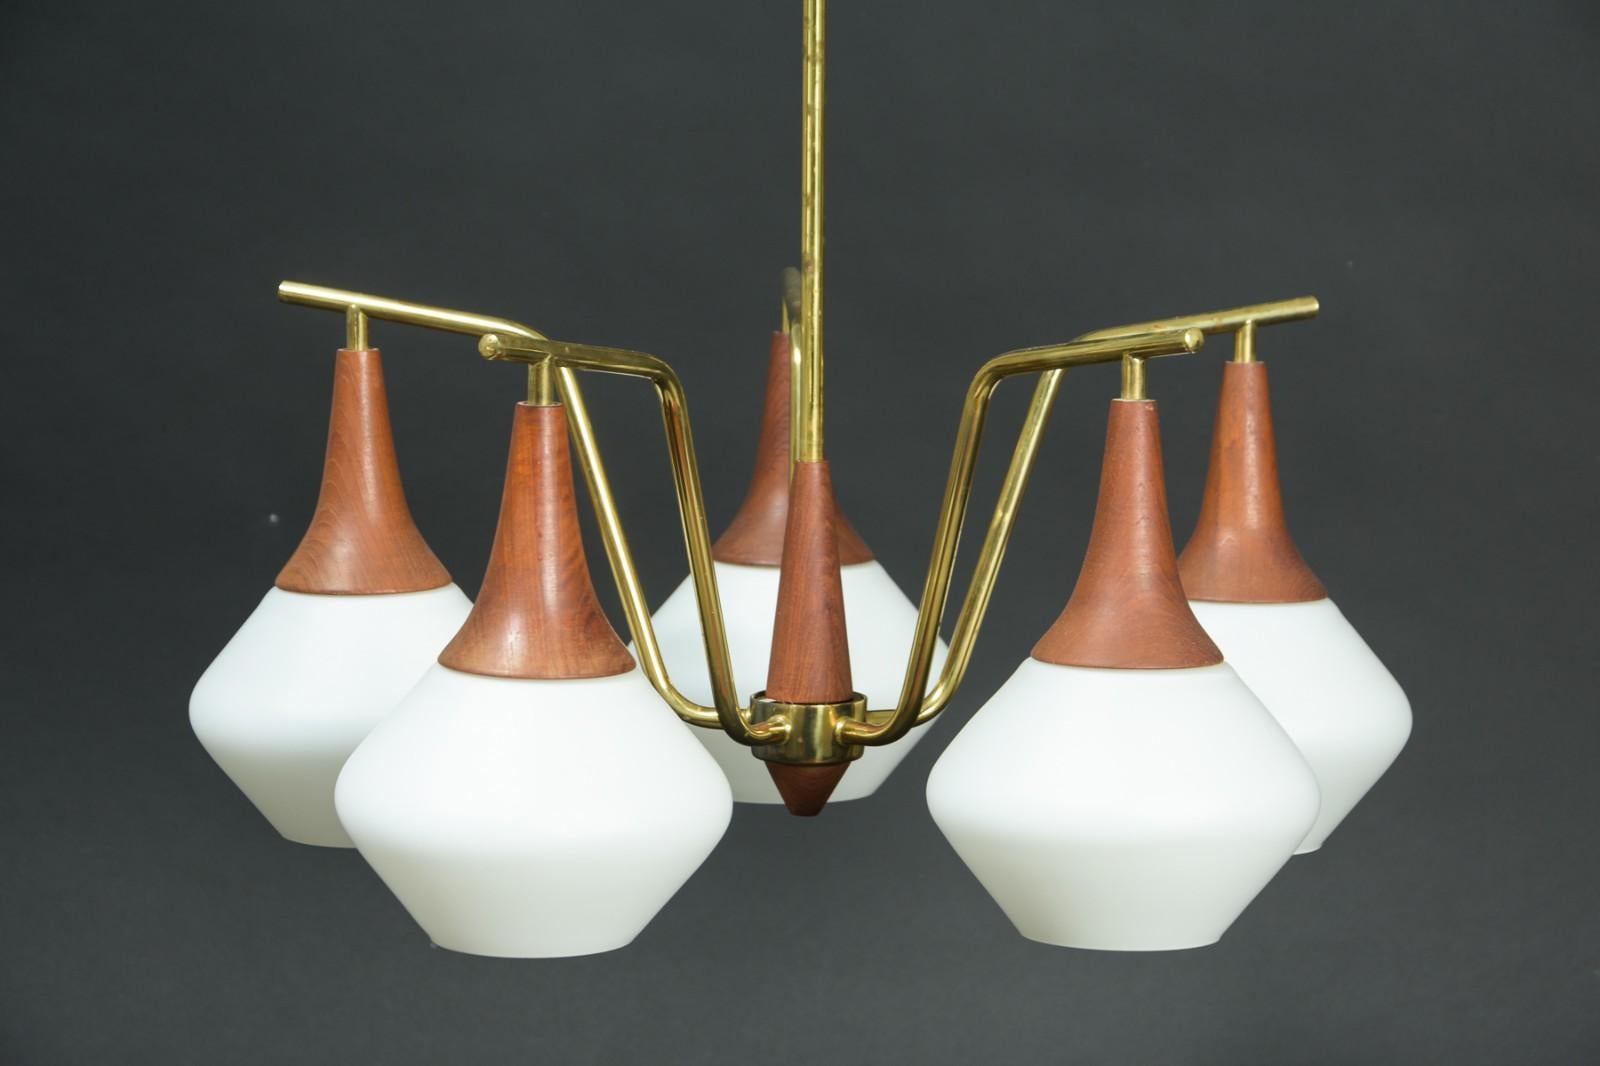 chandelier with 5 arms and teardrop-shaped shades of matt glass, patinated brass / teak. Manufactured in the 1950s in Denmark, Measures: H. 68 cm, Ø 53 cm.